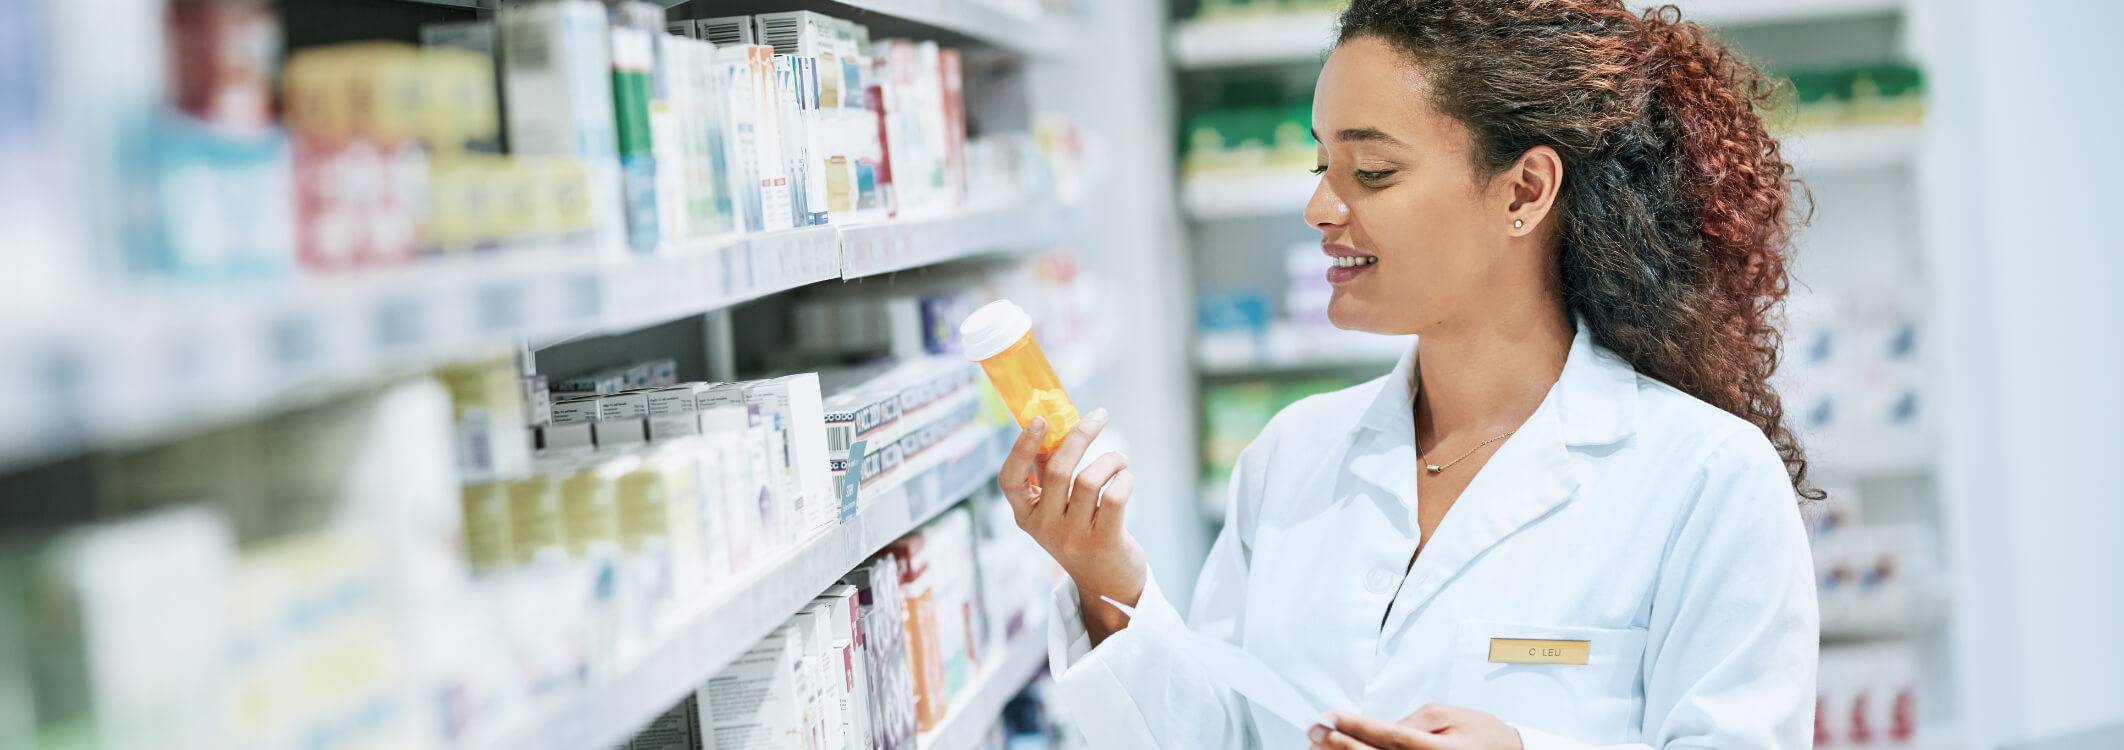 A pharmacist reviews a prescription in front of shelves of medicine